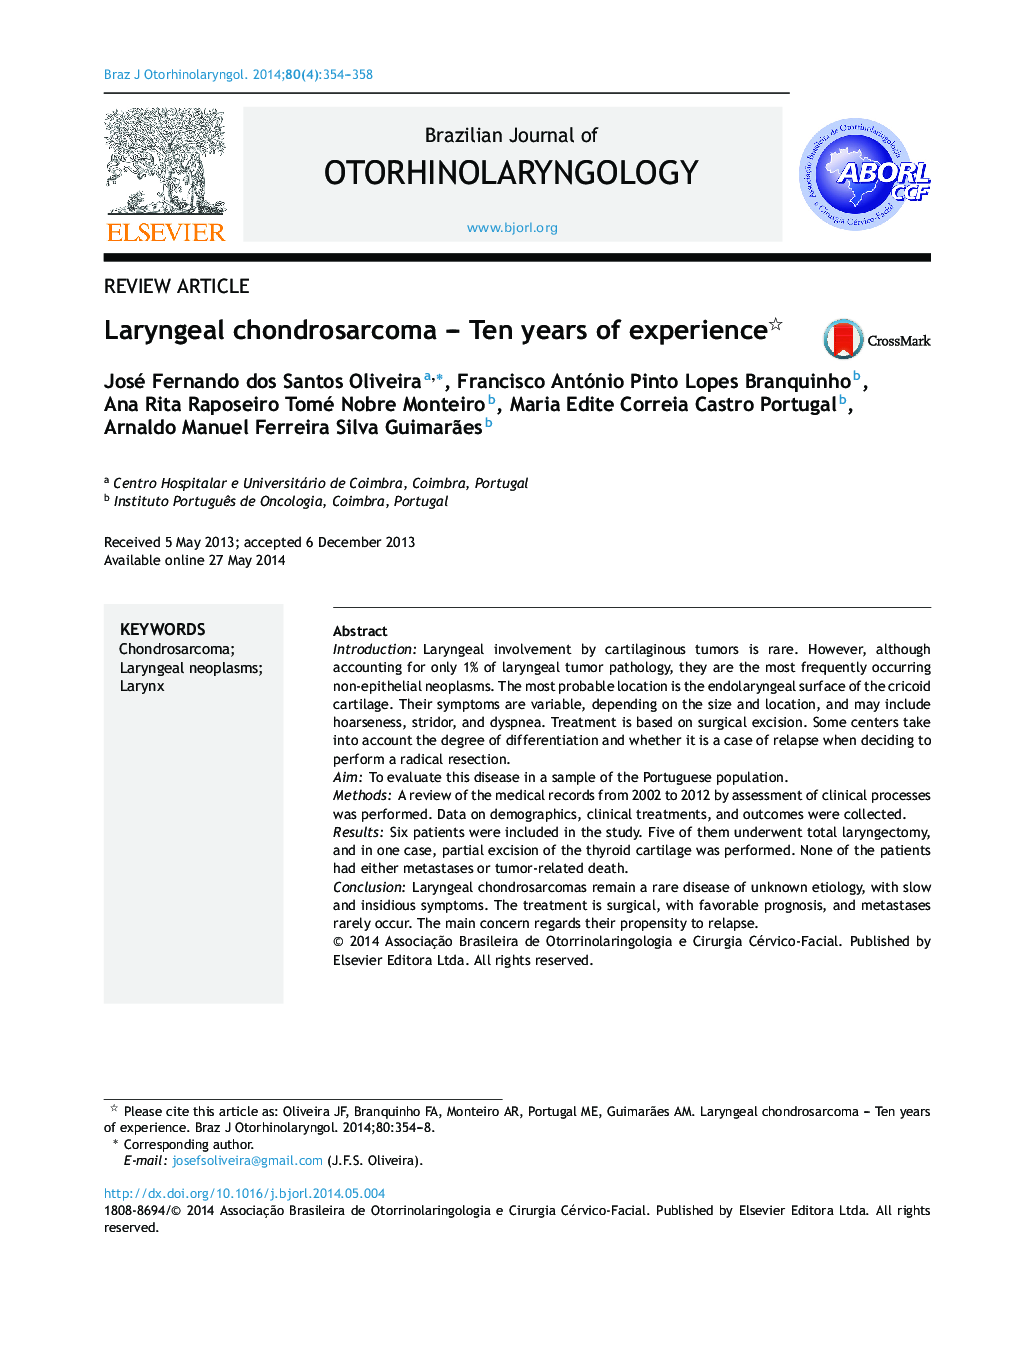 Laryngeal chondrosarcoma – Ten years of experience 